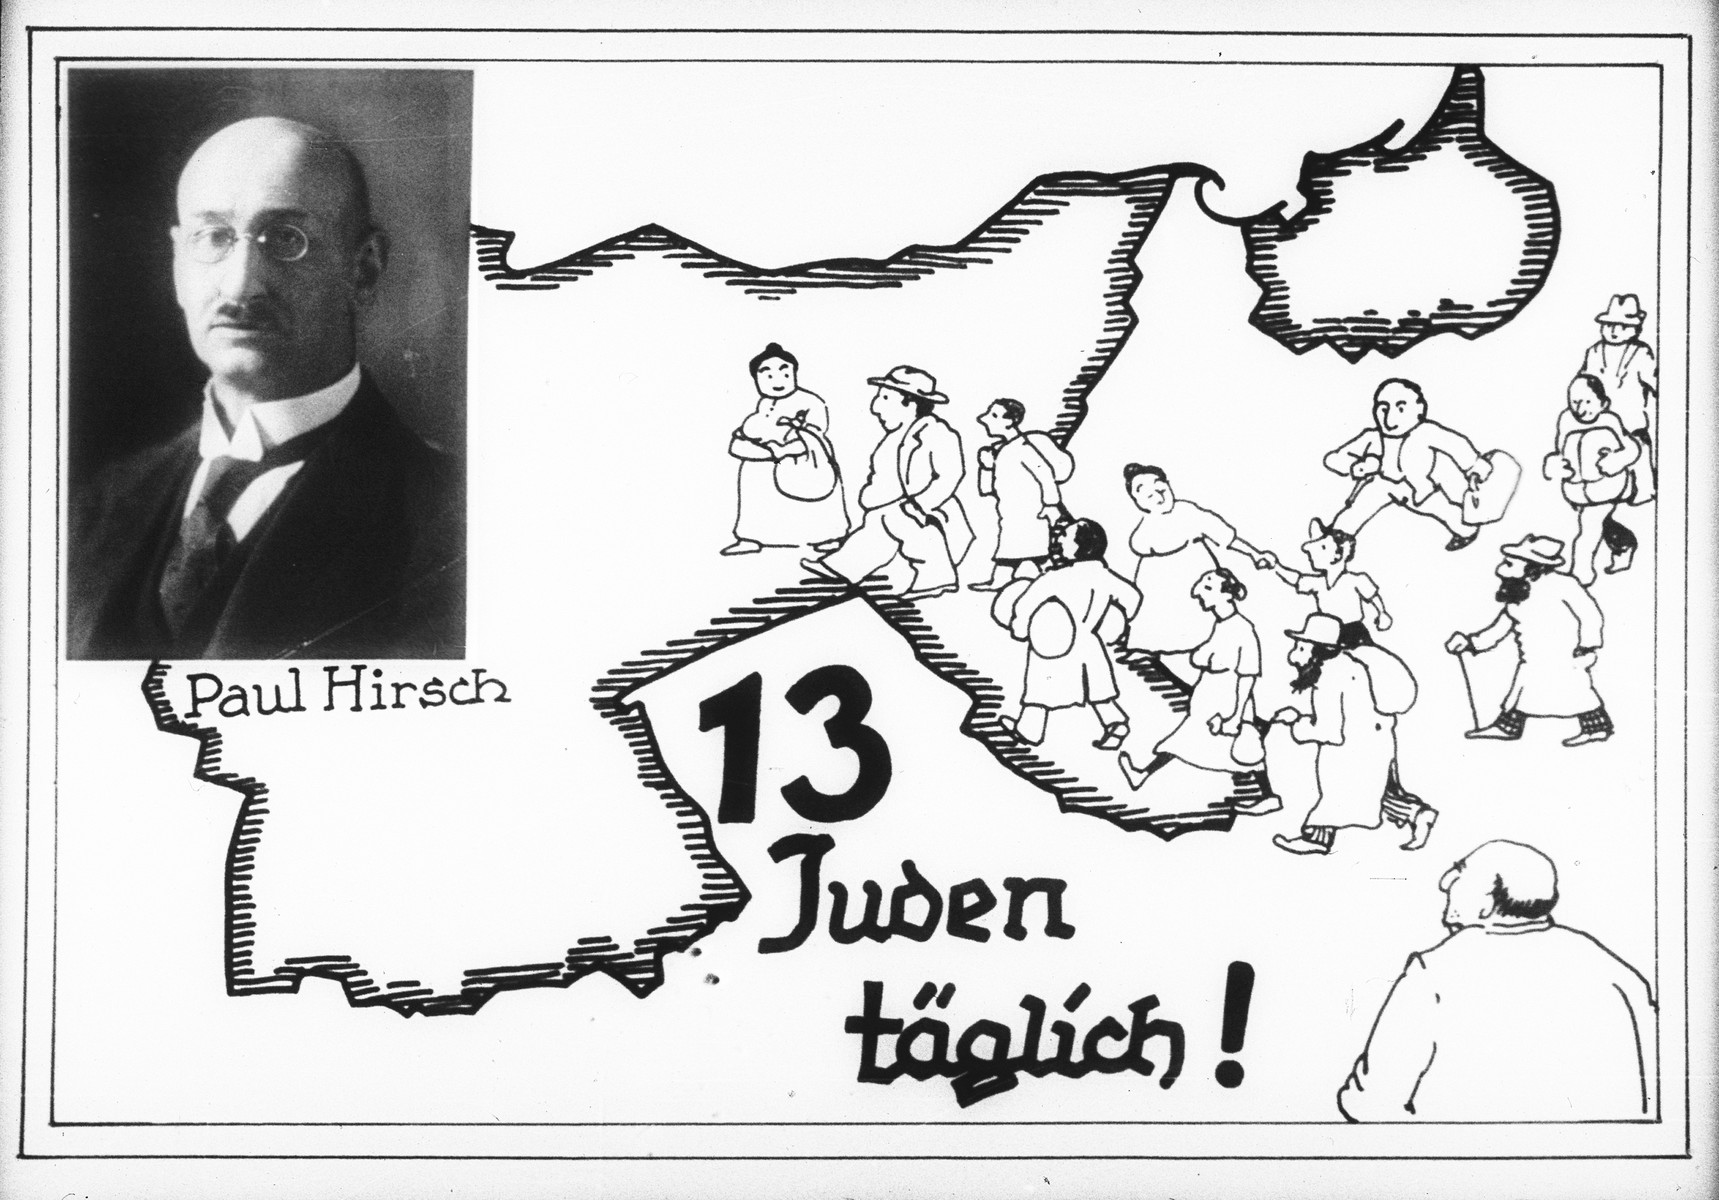 Propaganda slide entitled, "13 Jews Daily," featuring a map showing Jewish refugees flocking over Germany's eastern border along with a portrait of Paul Hirsch.